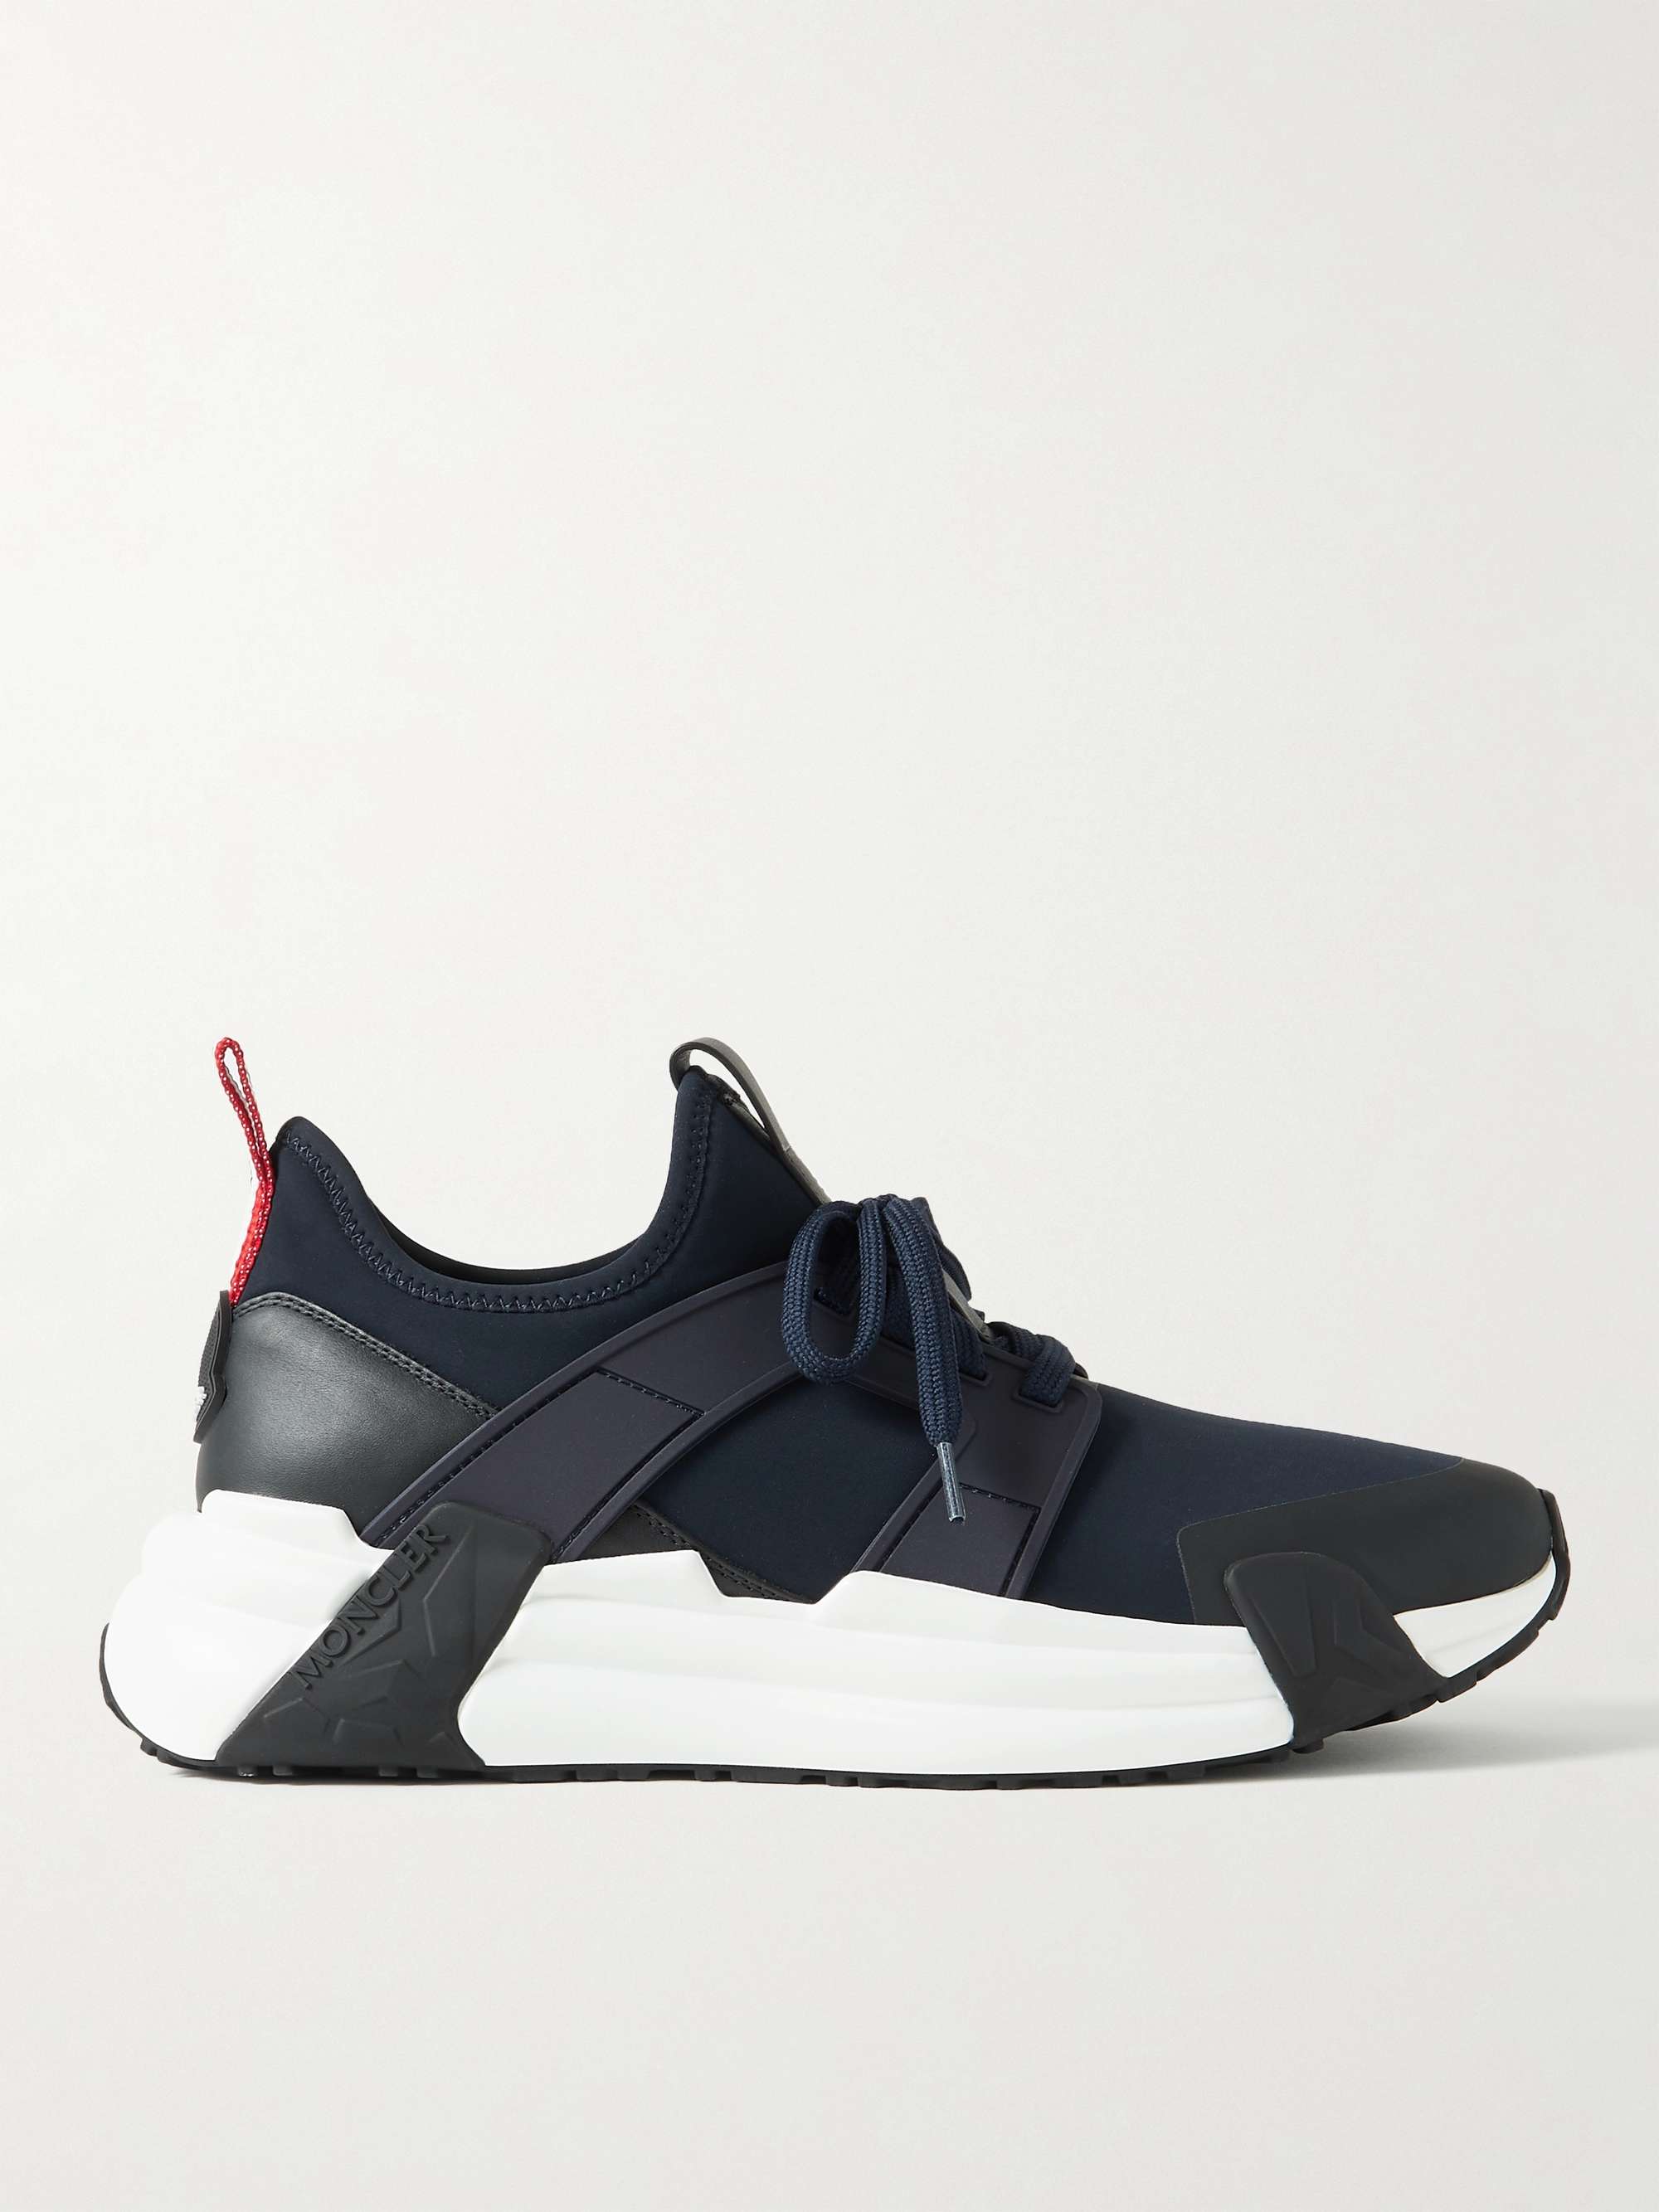 MONCLER Lunarove Rubber and Leather-Trimmed Neoprene Sneakers | MR PORTER